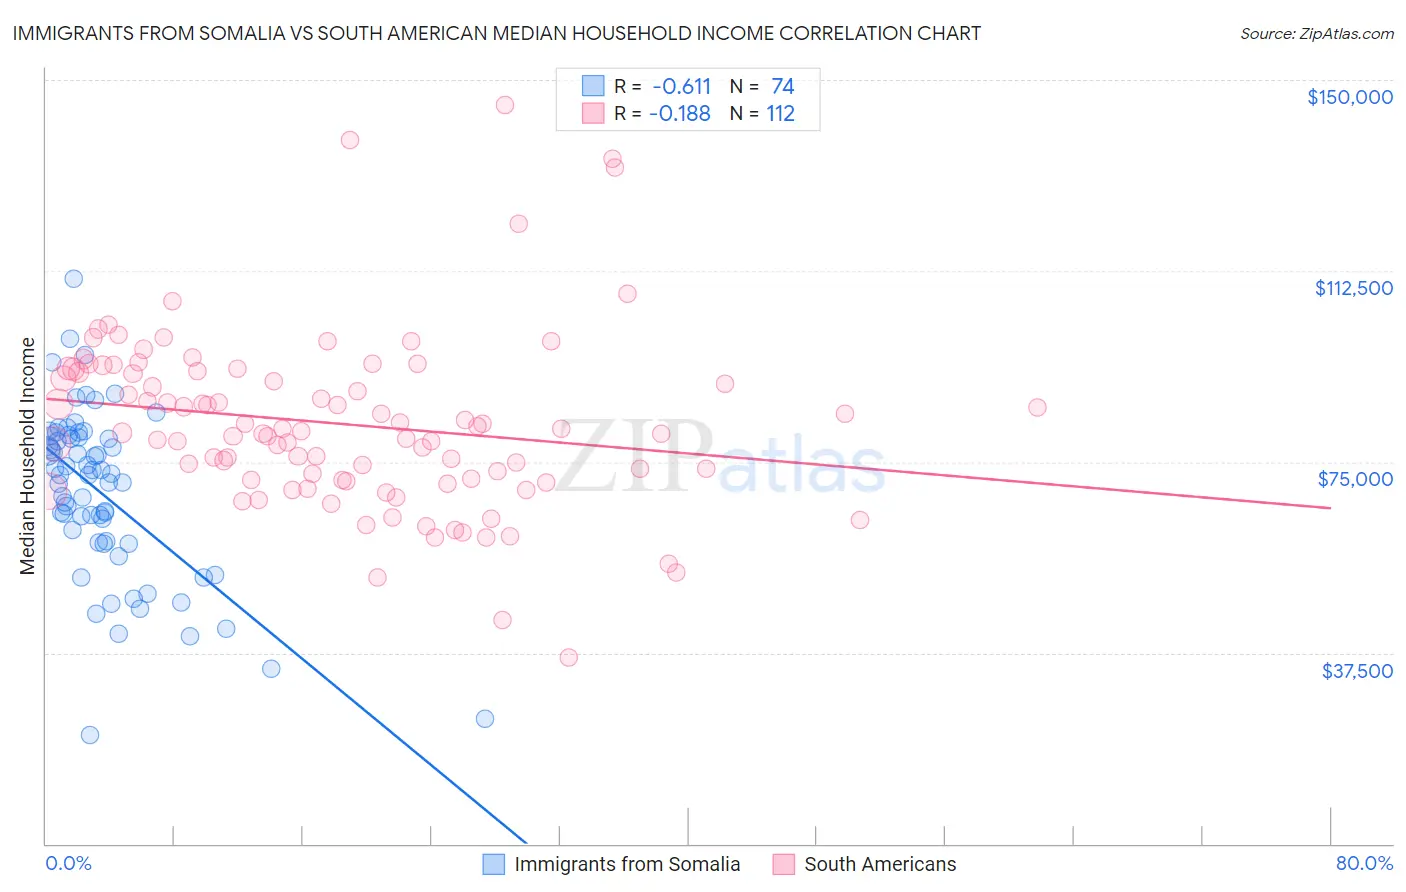 Immigrants from Somalia vs South American Median Household Income